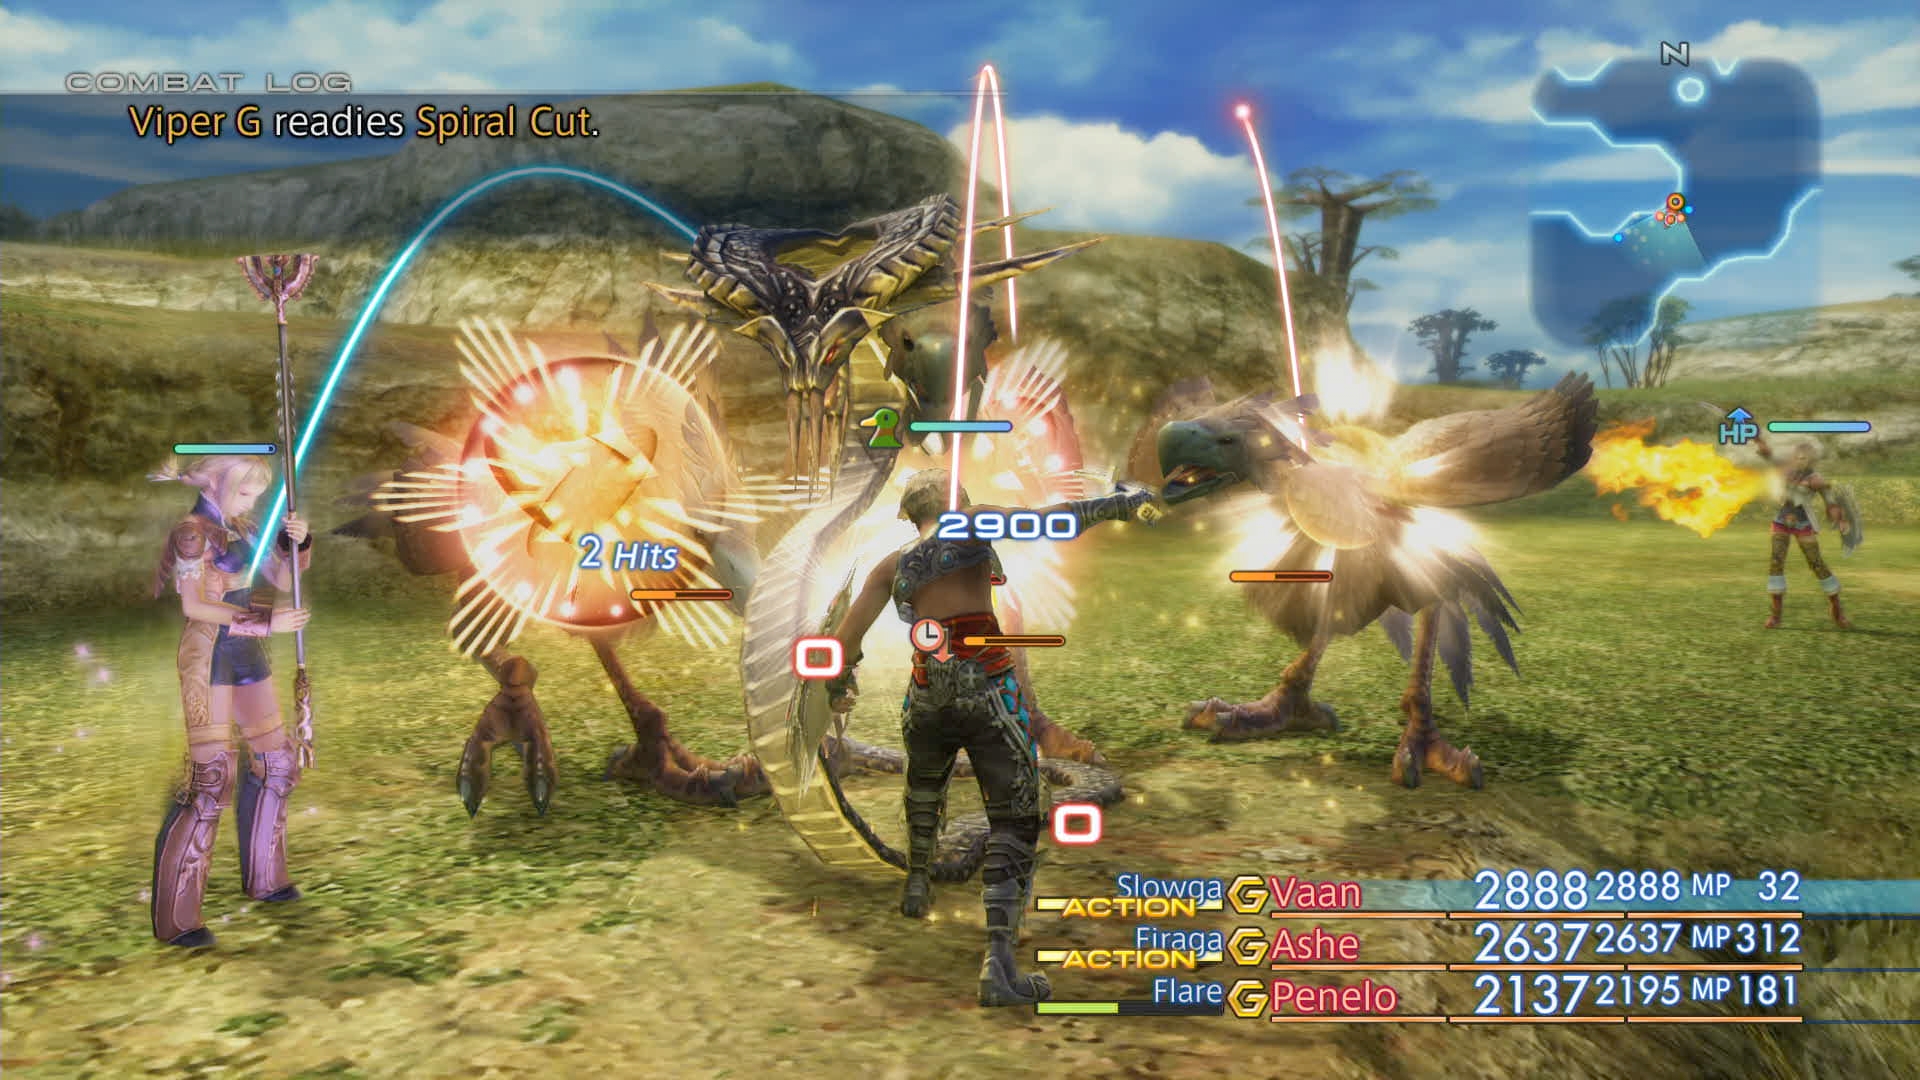 Final Fantasy XX-2 HD Remaster And Final Fantasy XII Dated In